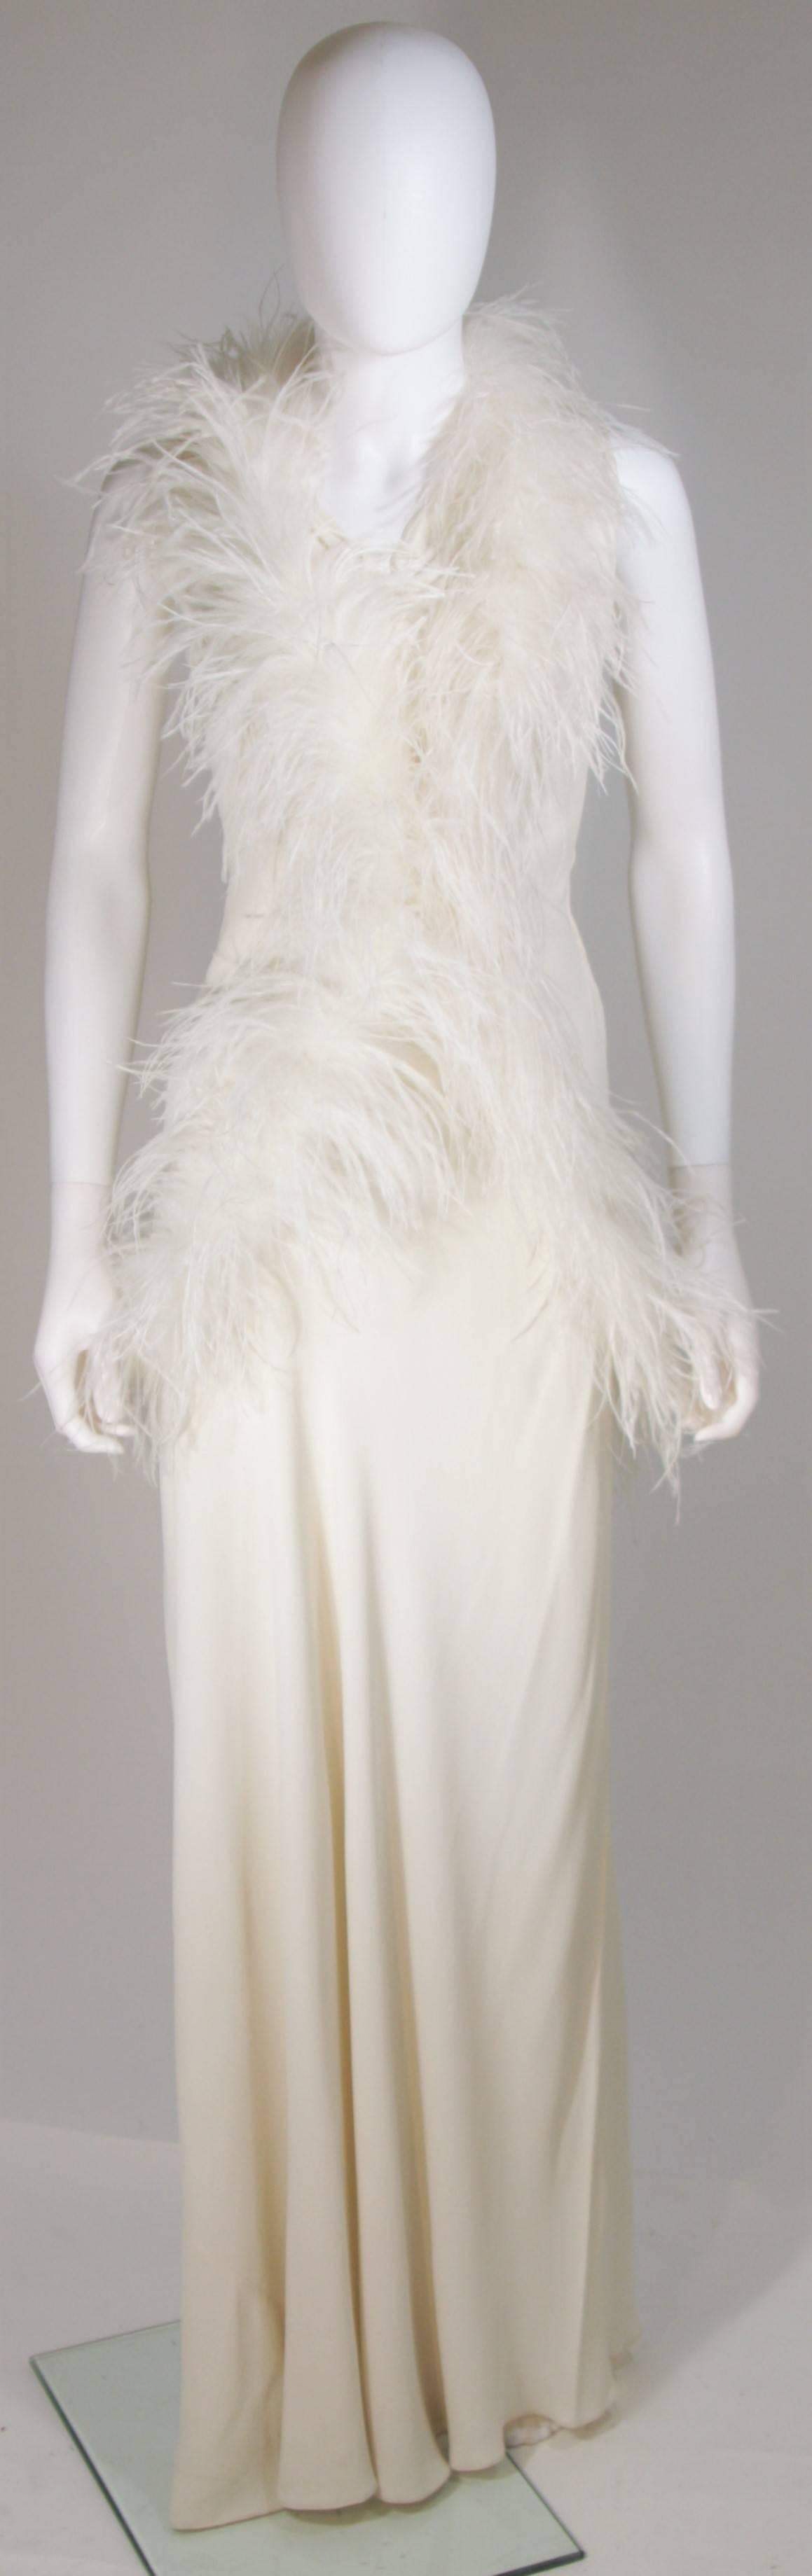 This Elizabeth Mason Couture wrap is available for viewing at our Beverly Hills Boutique. Fashioned from the finest feathers,  this wrap is created at Elizabeth Mason's Beverly Hills Atelier. We offer exclusive custom made couture gowns suited to